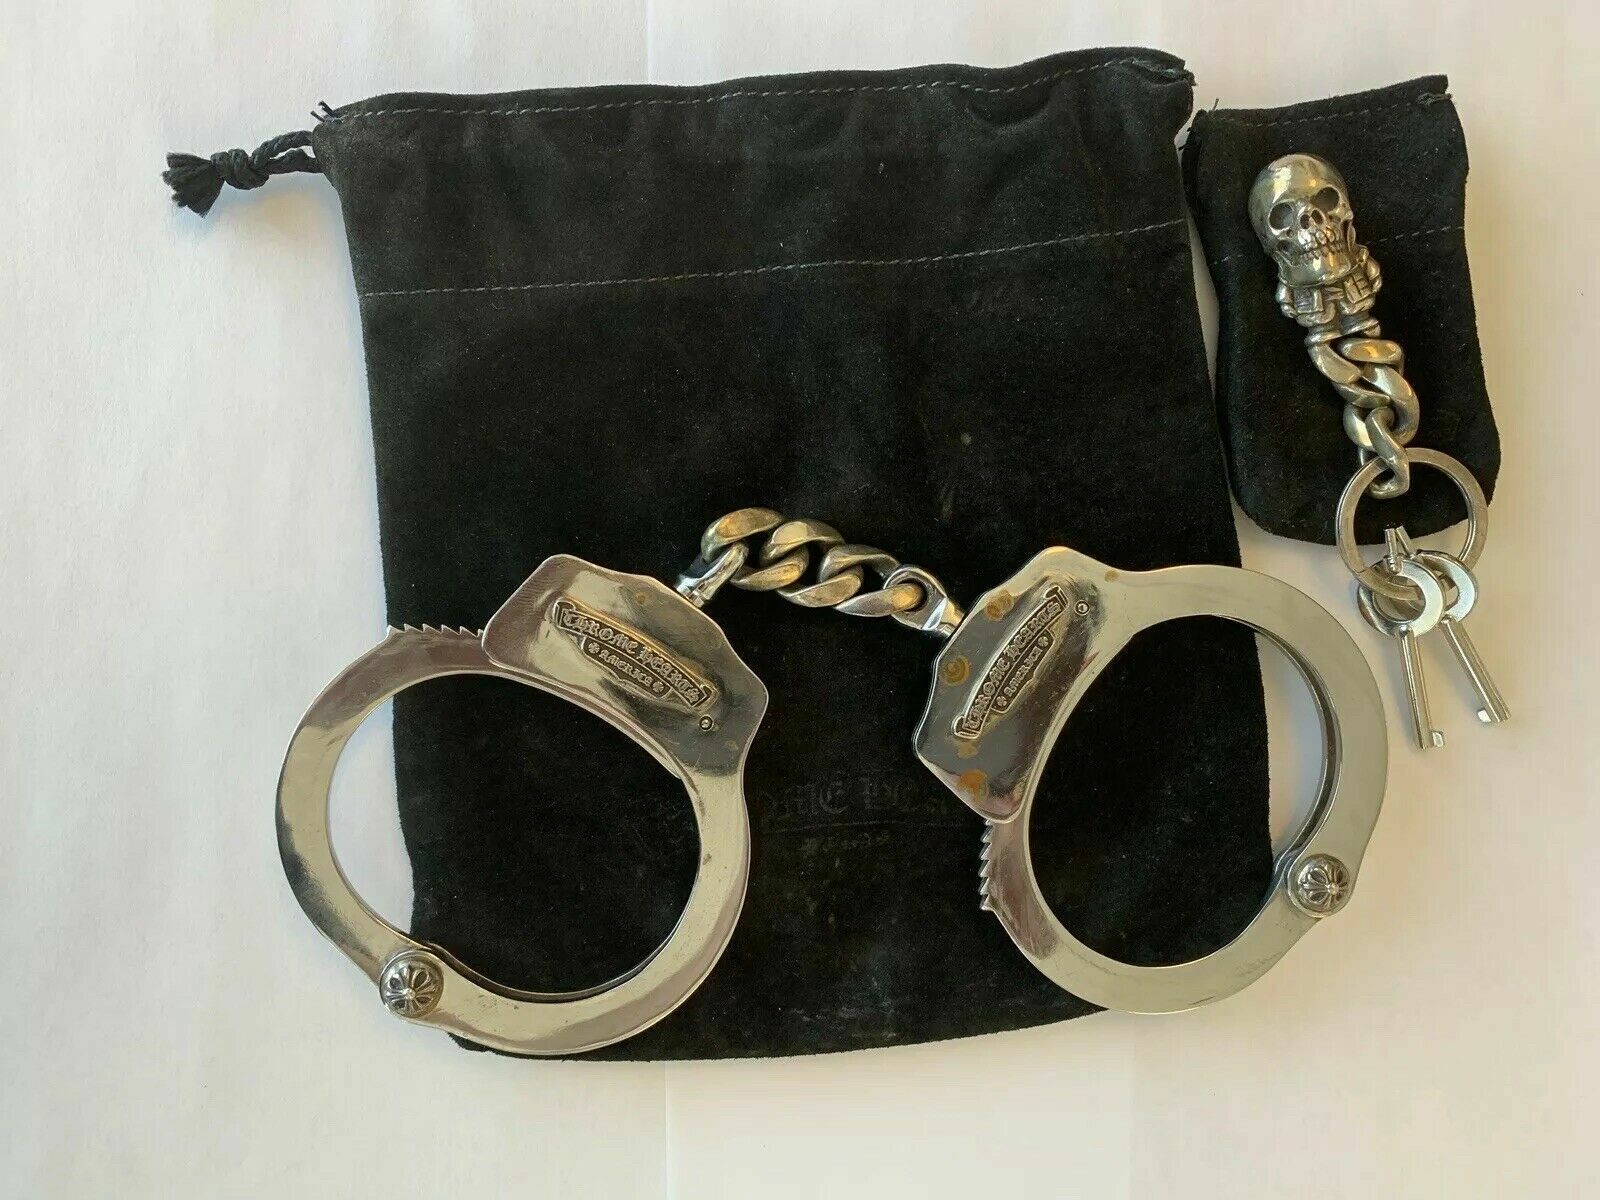 Chrome Hearts Silver Handcuffs And Skull Keyring